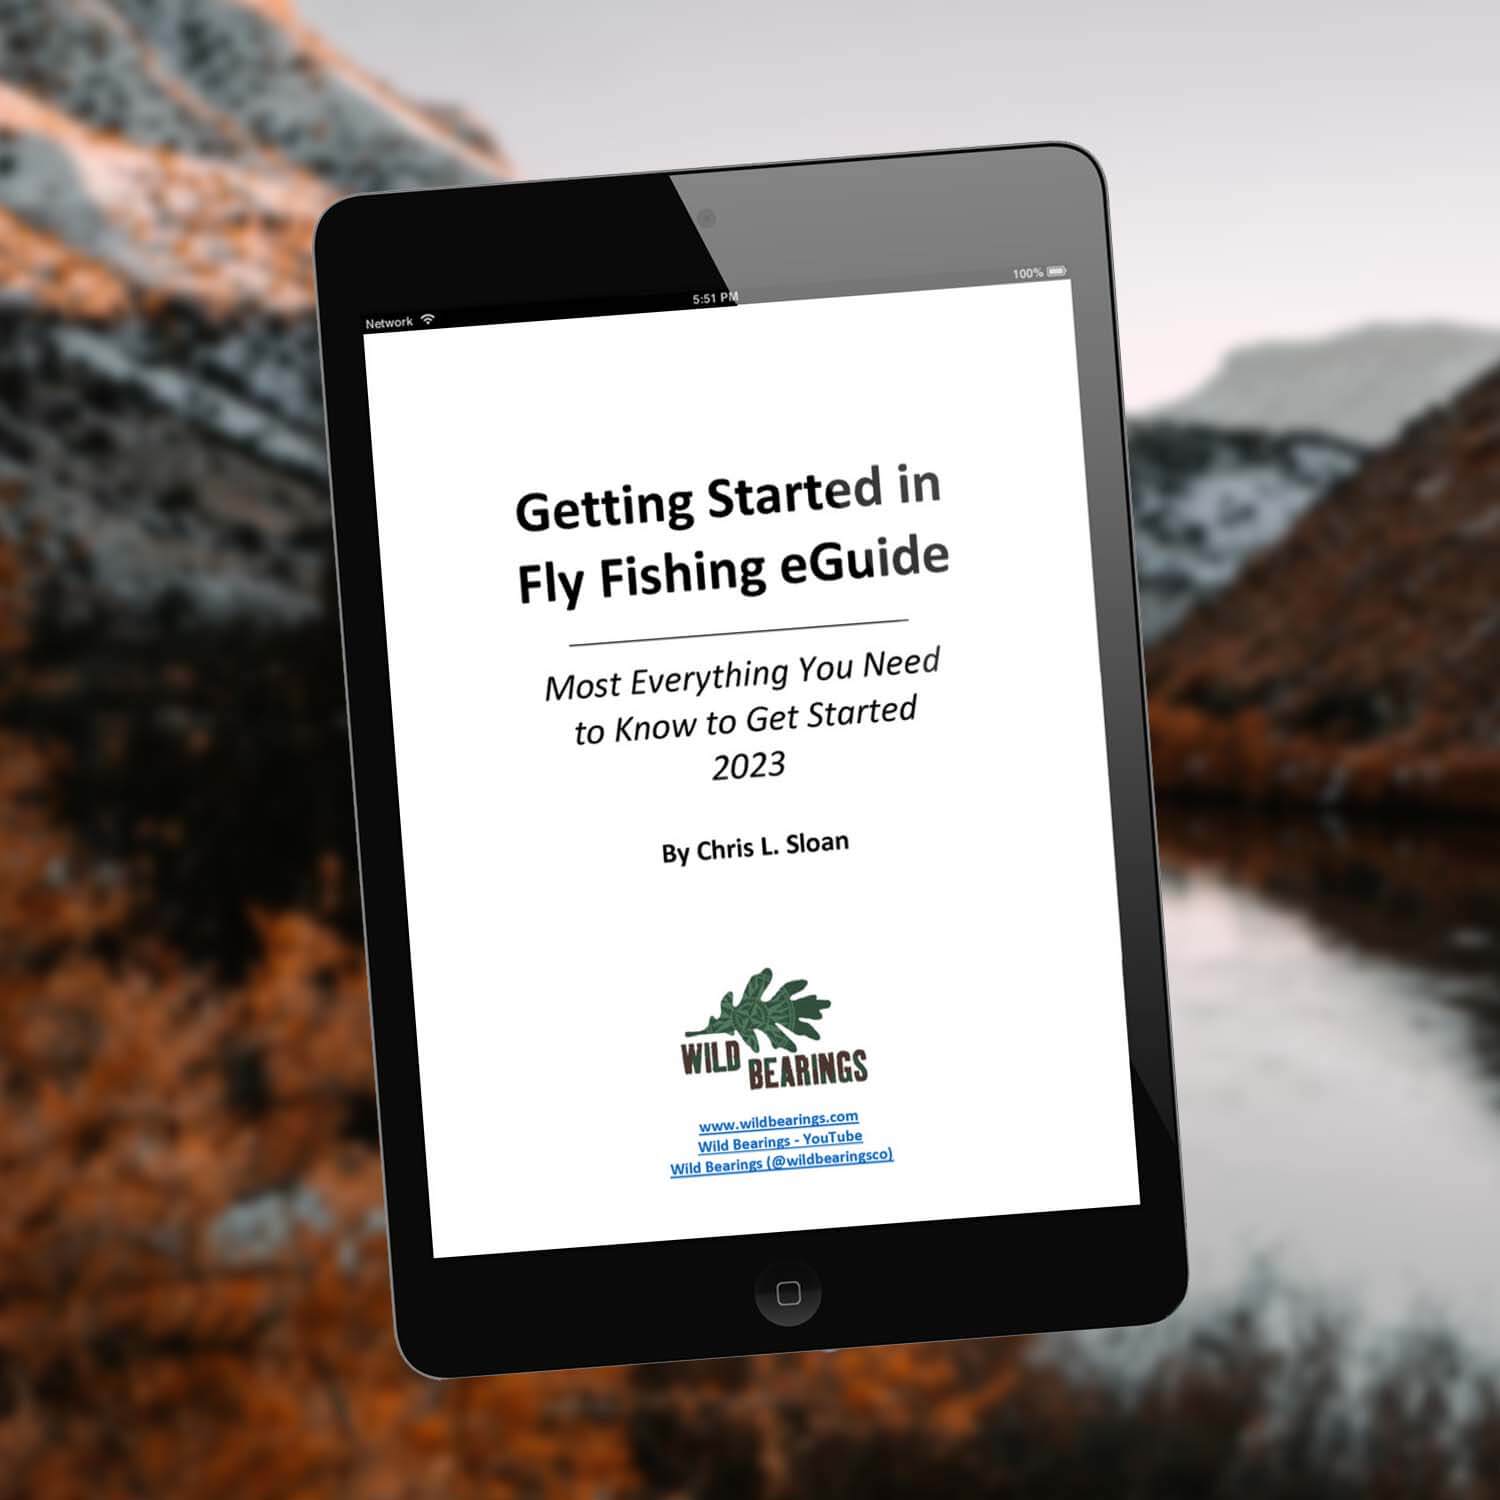 eBook cover on iPad reading Getting Started in Fly Fishing eGuide